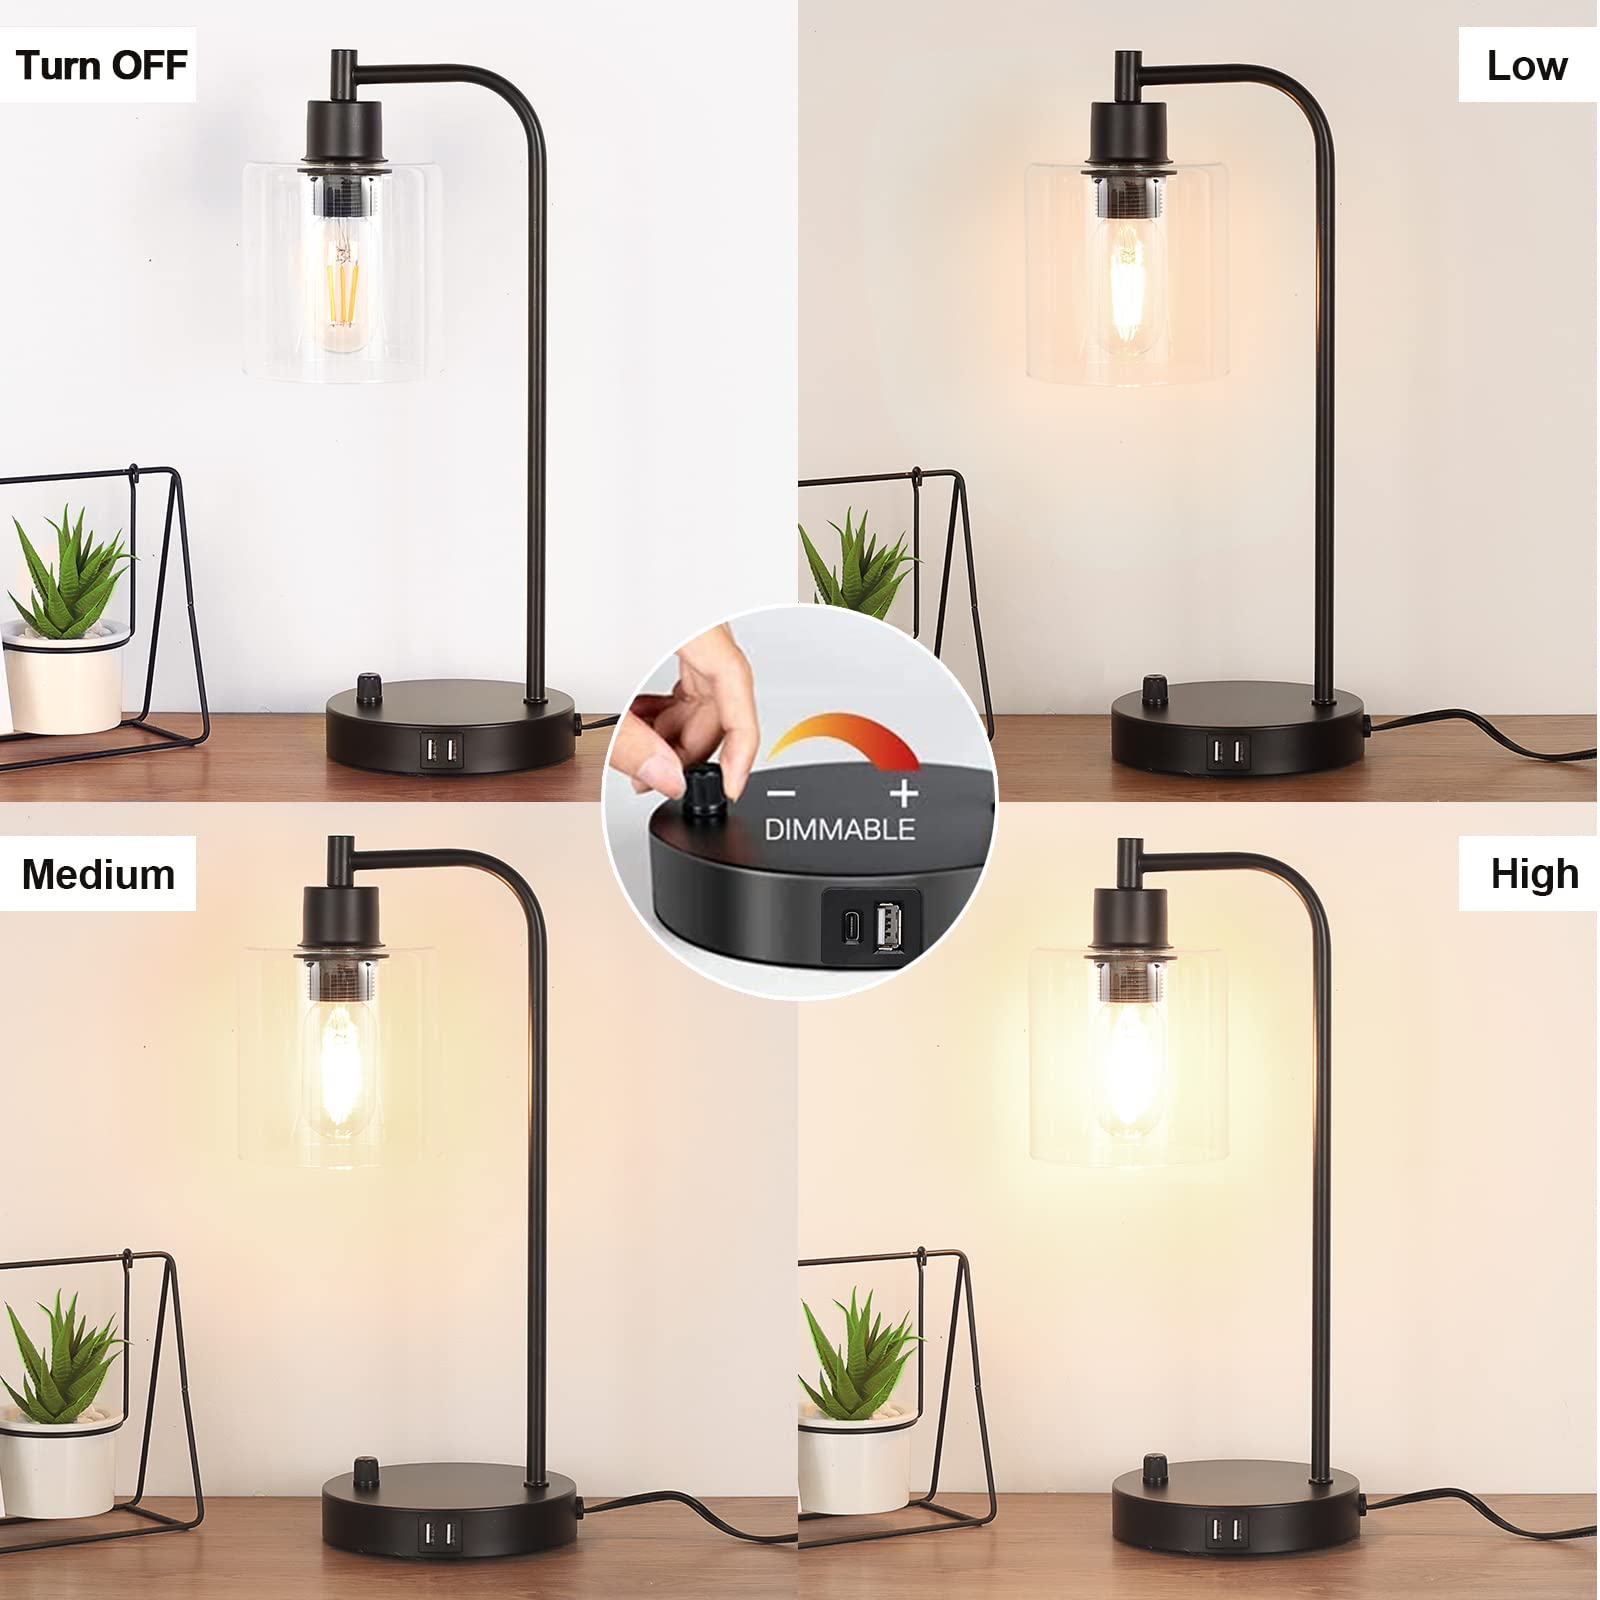 Industrial Table Lamp with 2 USB Charging Ports, Fully Stepless Dimmable Modern Nightstand Lamp, Glass Shade Bedside Desk Lamp for Bedroom Living Room Office, 6W 2700K LED Edison Bulb Included